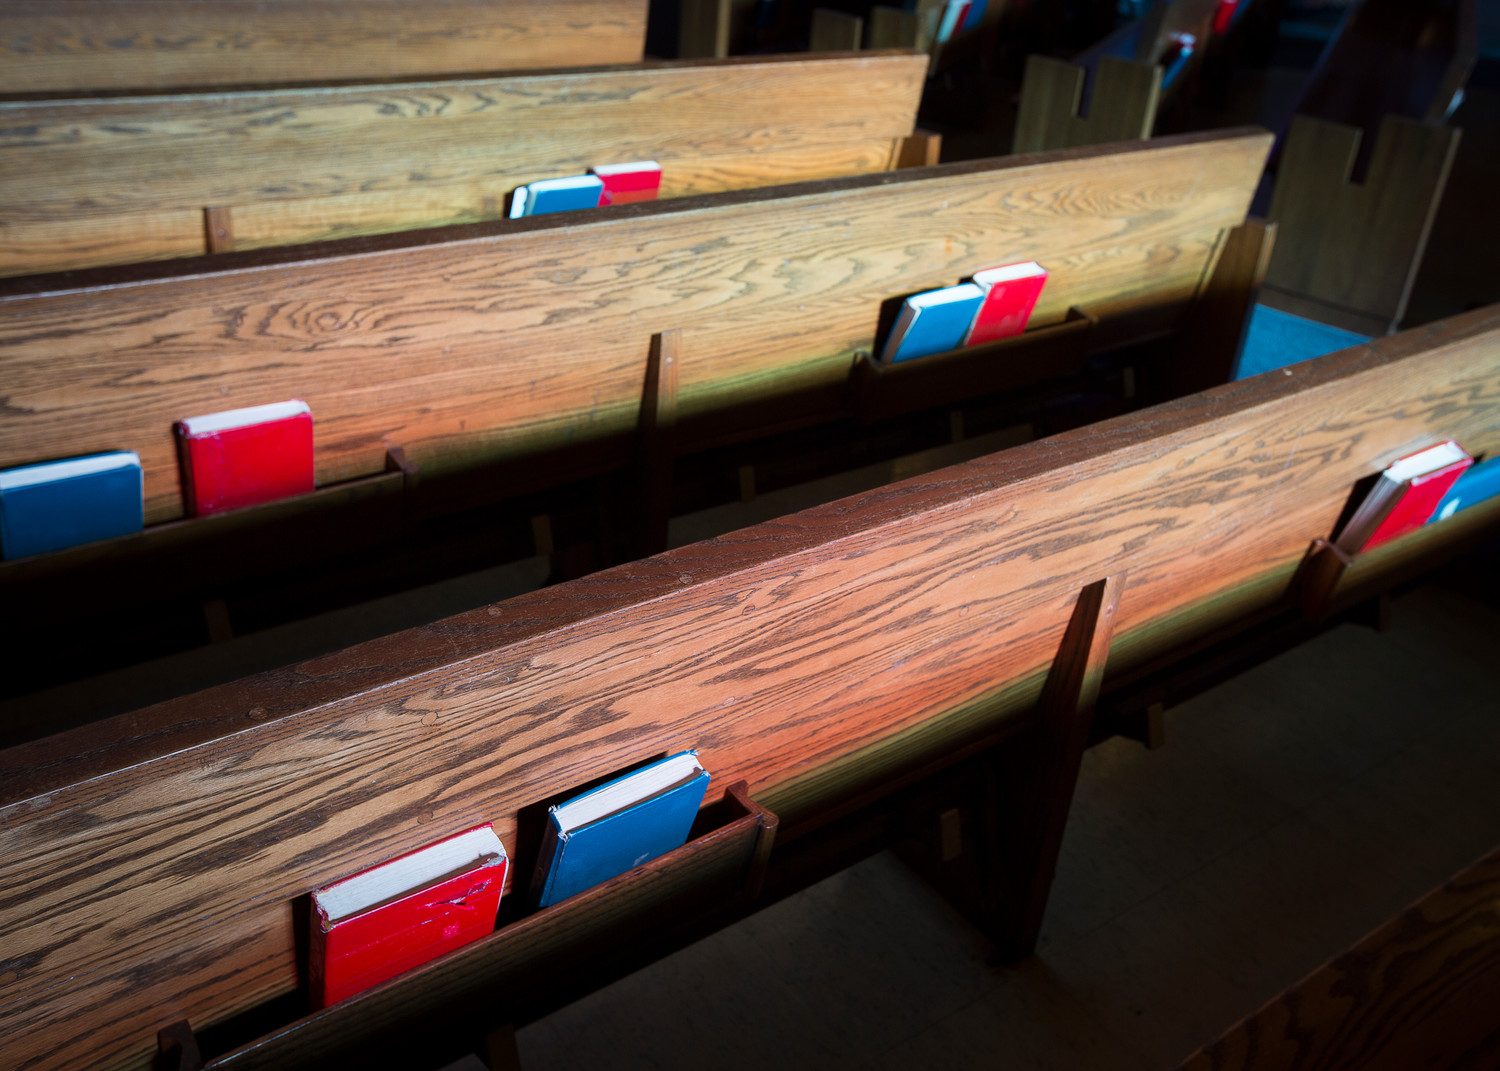 Pews are seen at St. Camillus Church in Silver Spring, Maryland, April 10.